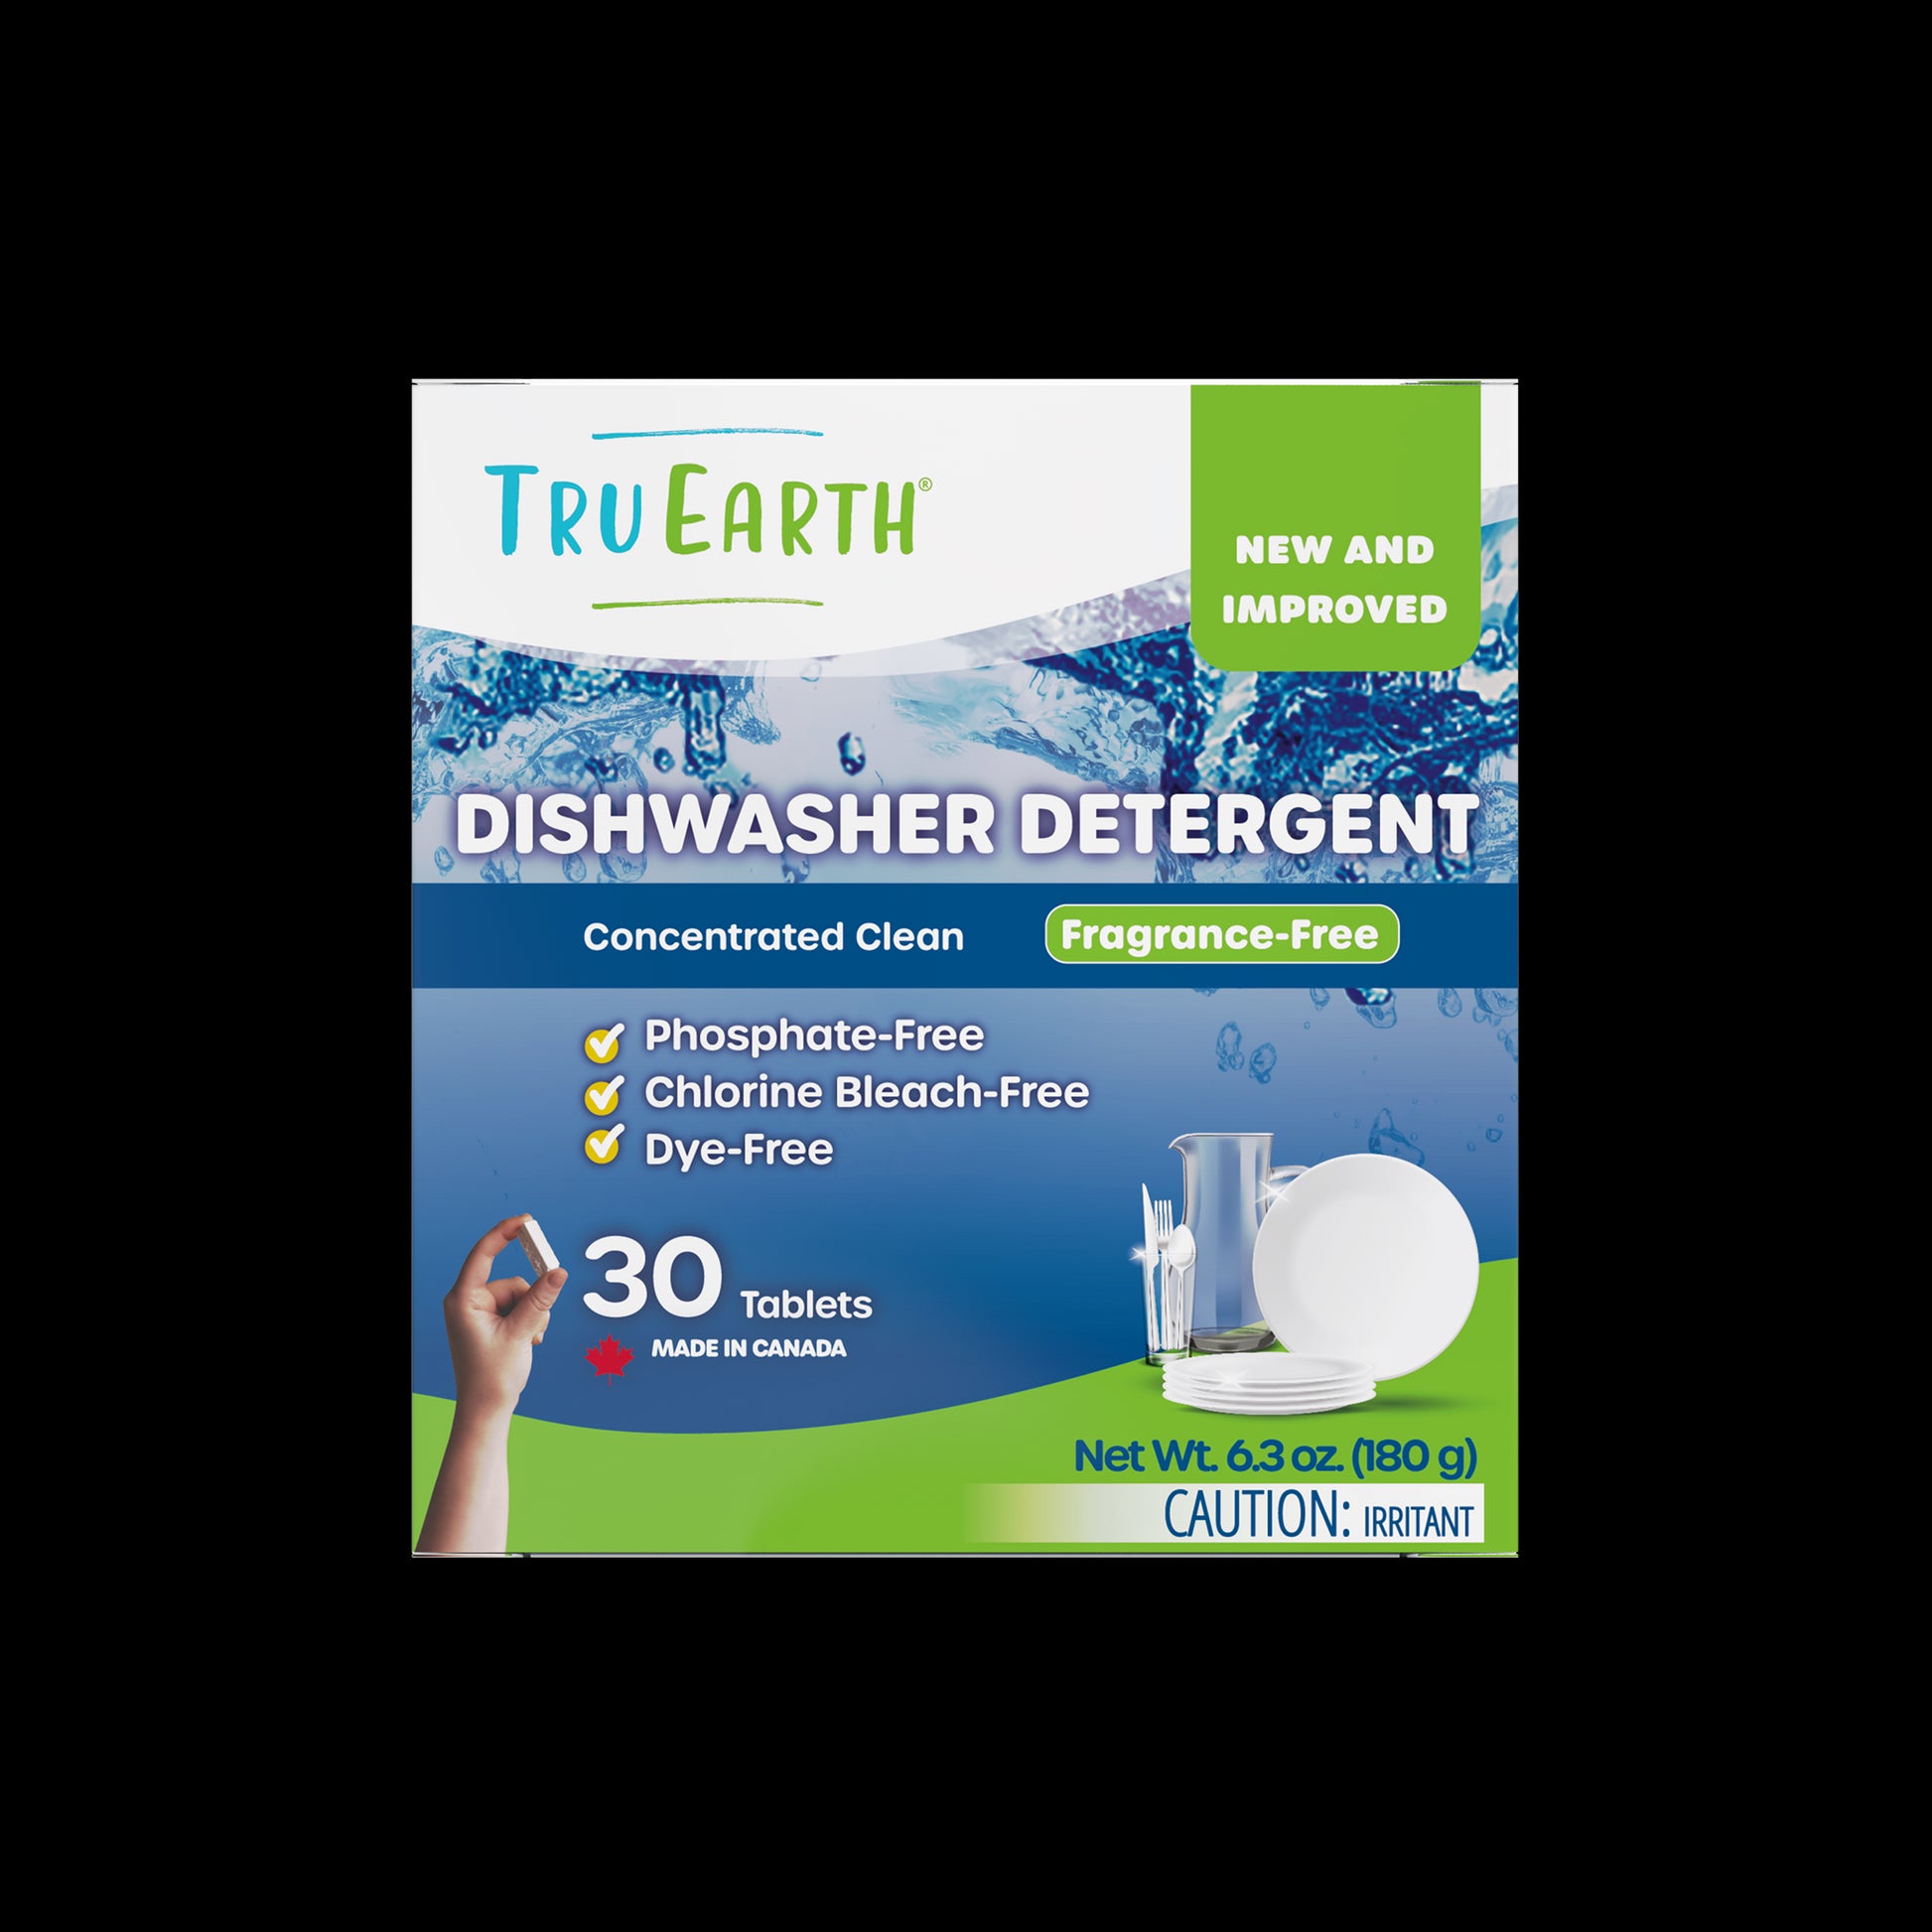 TruEarth Dishwasher Detergent Front of Package